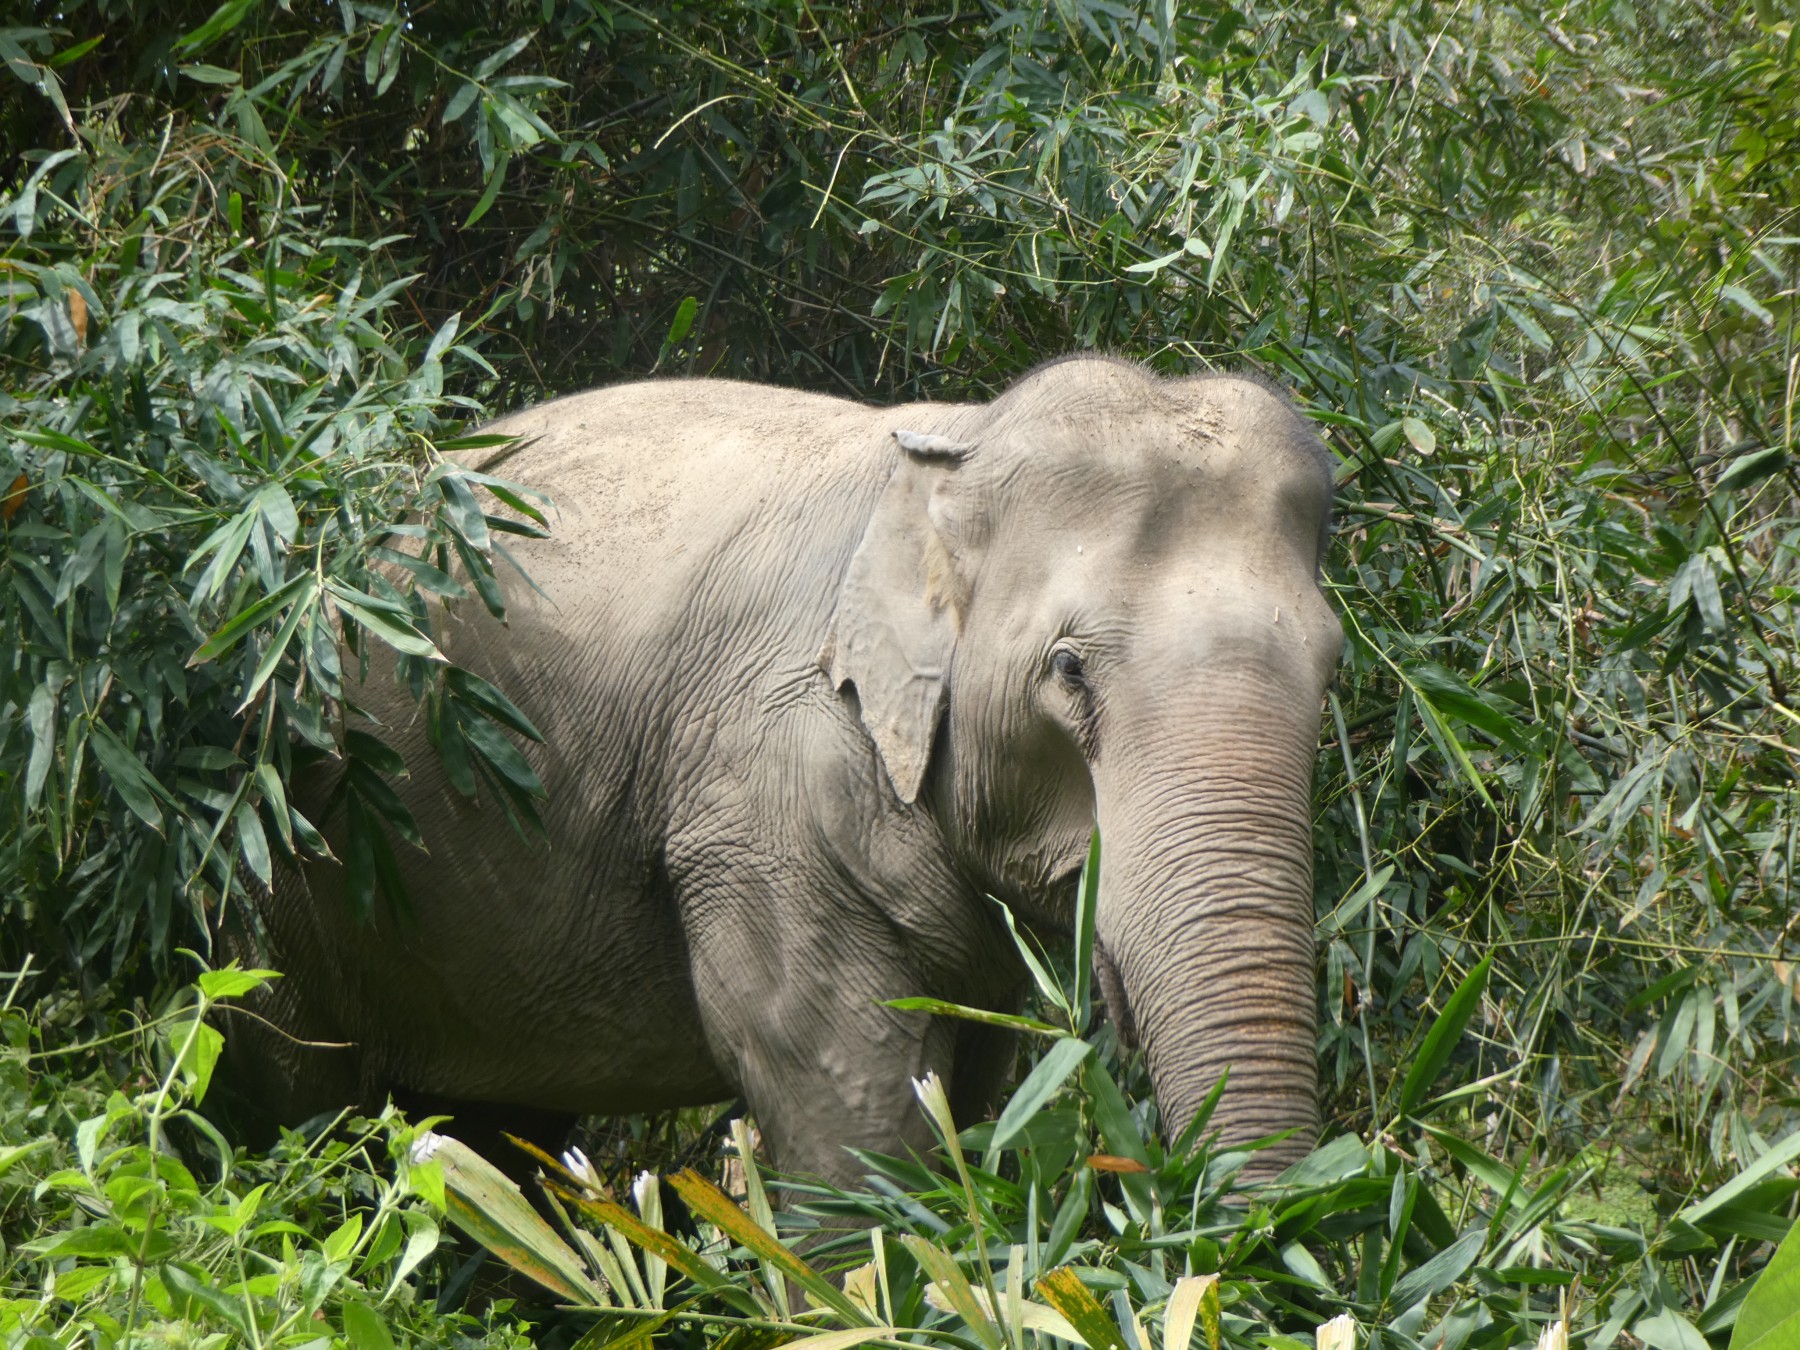 Jahn the elephant at the Following Giants elephant-friendly venue - World Animal Protection